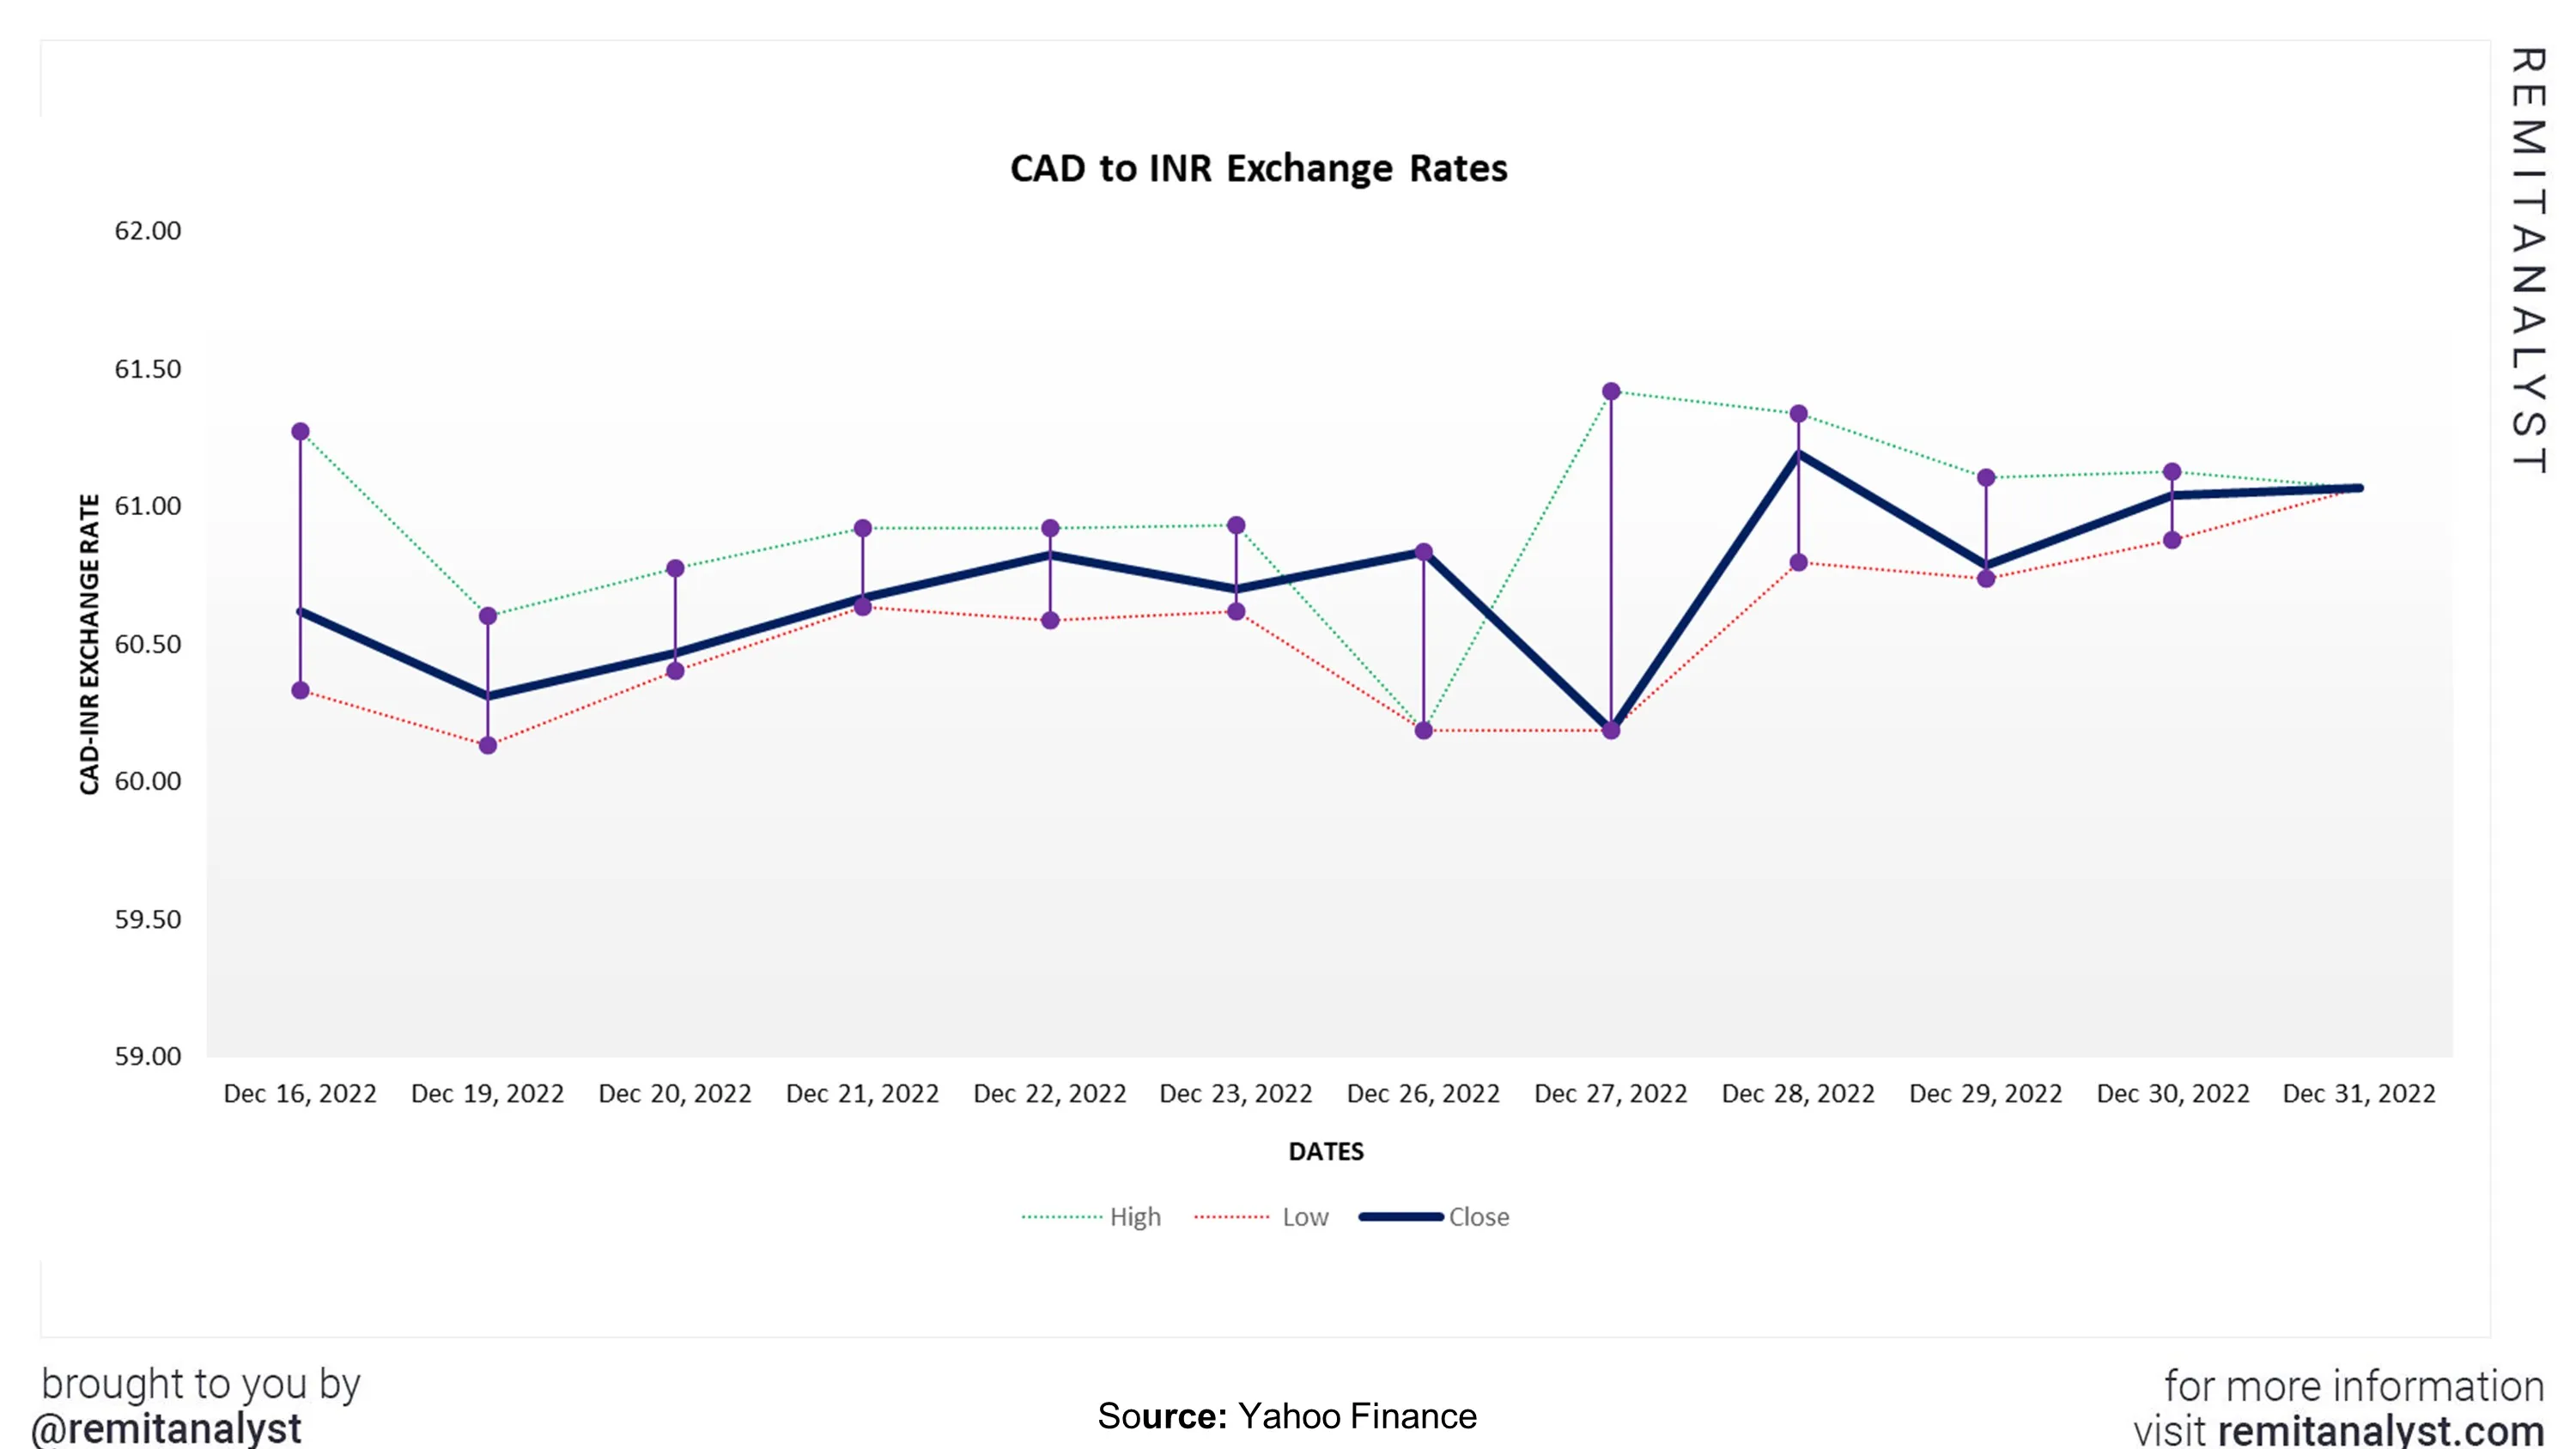 cad-to-inr-exchange-rate-from-16-dec-2022-to-31-dec-2022